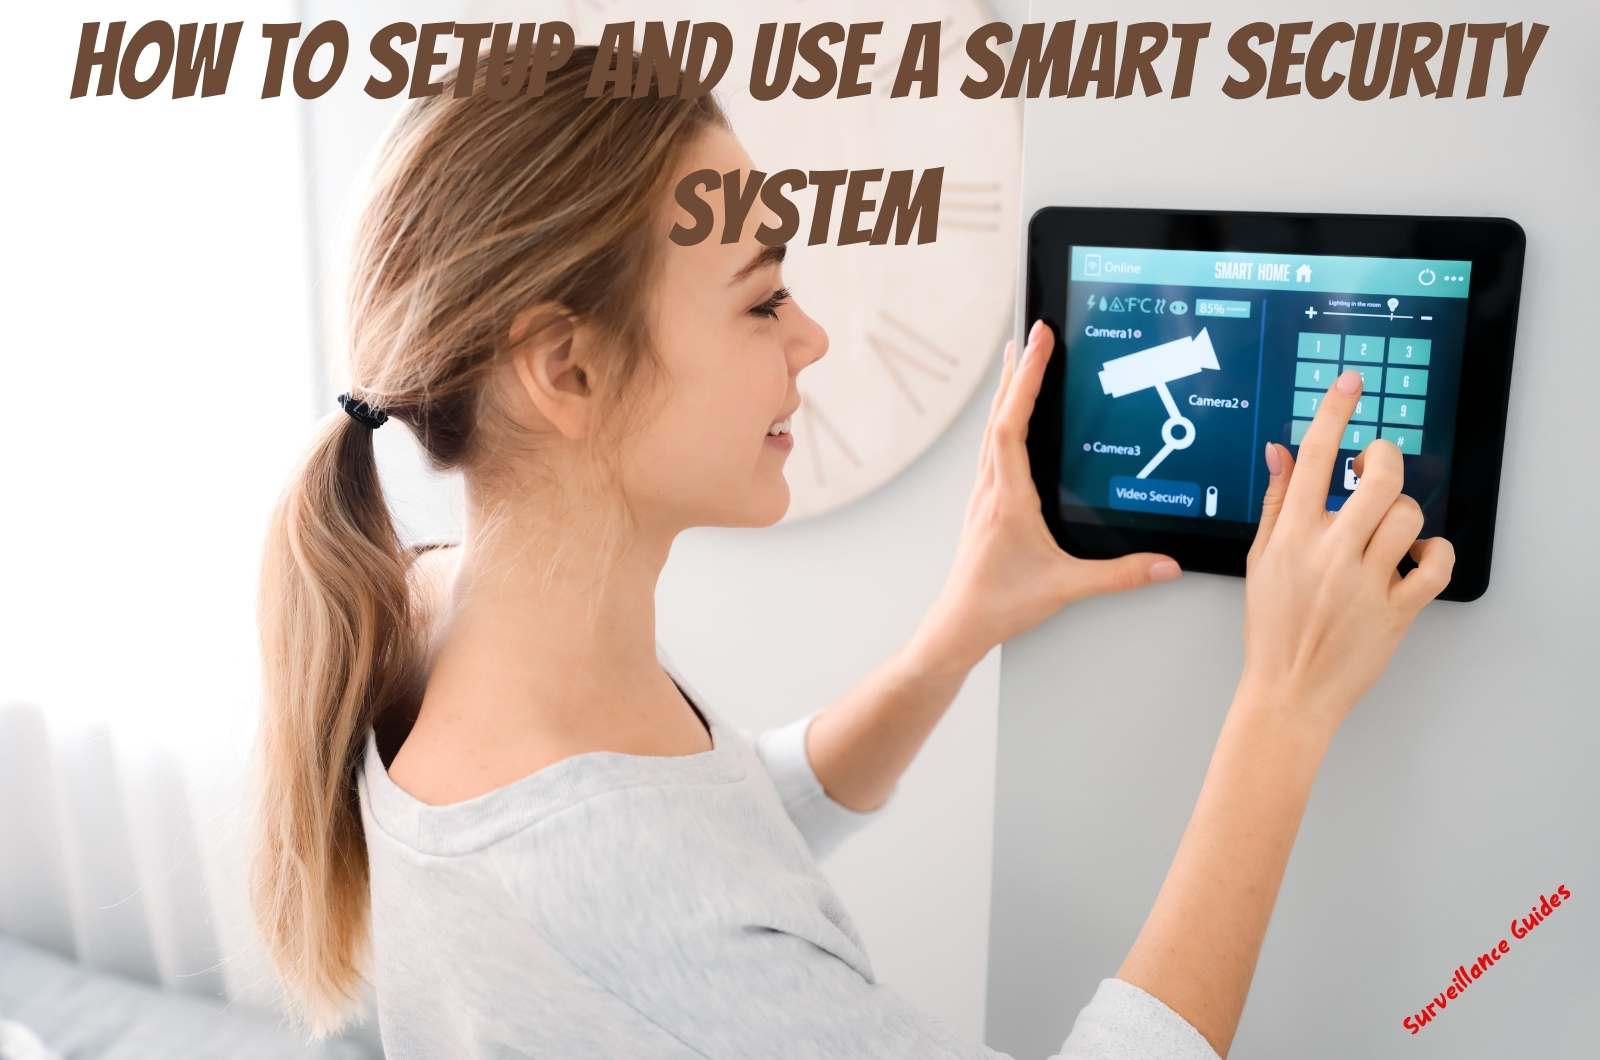 How to Setup and Use a Smart Security System